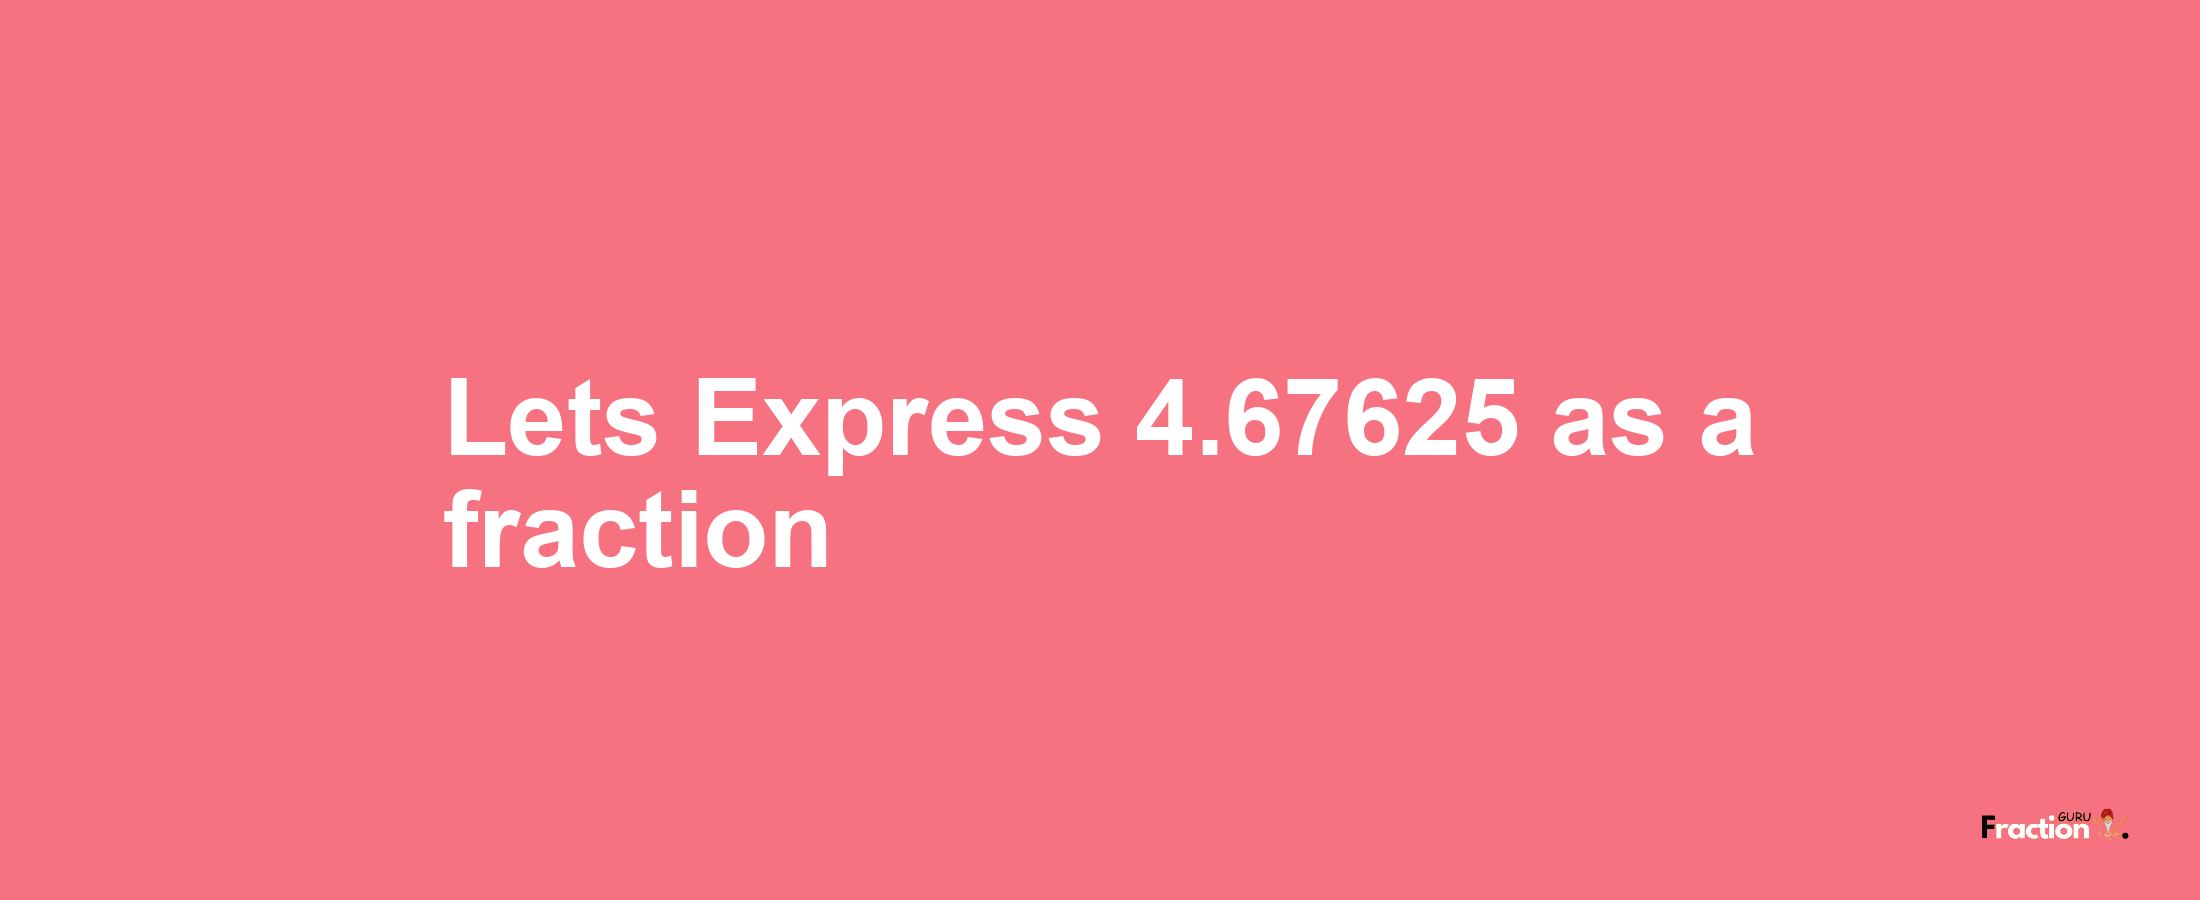 Lets Express 4.67625 as afraction